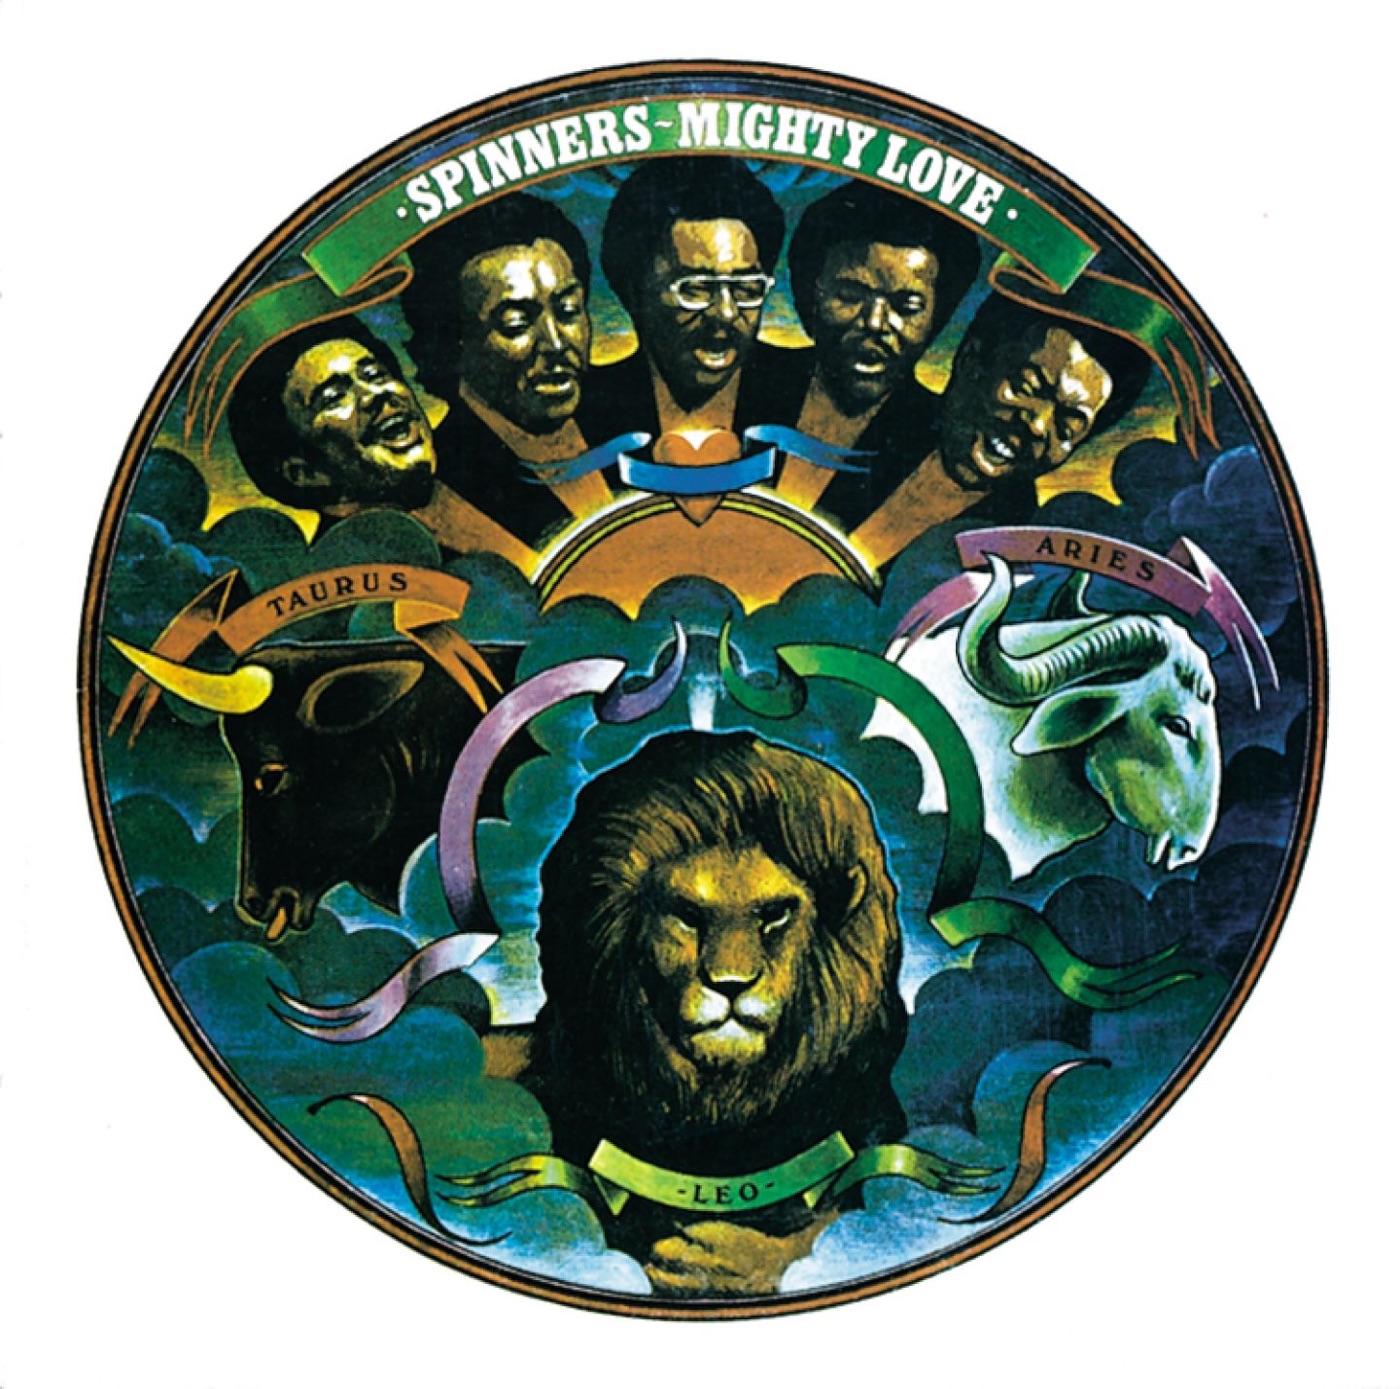 Mighty Love by The Spinners